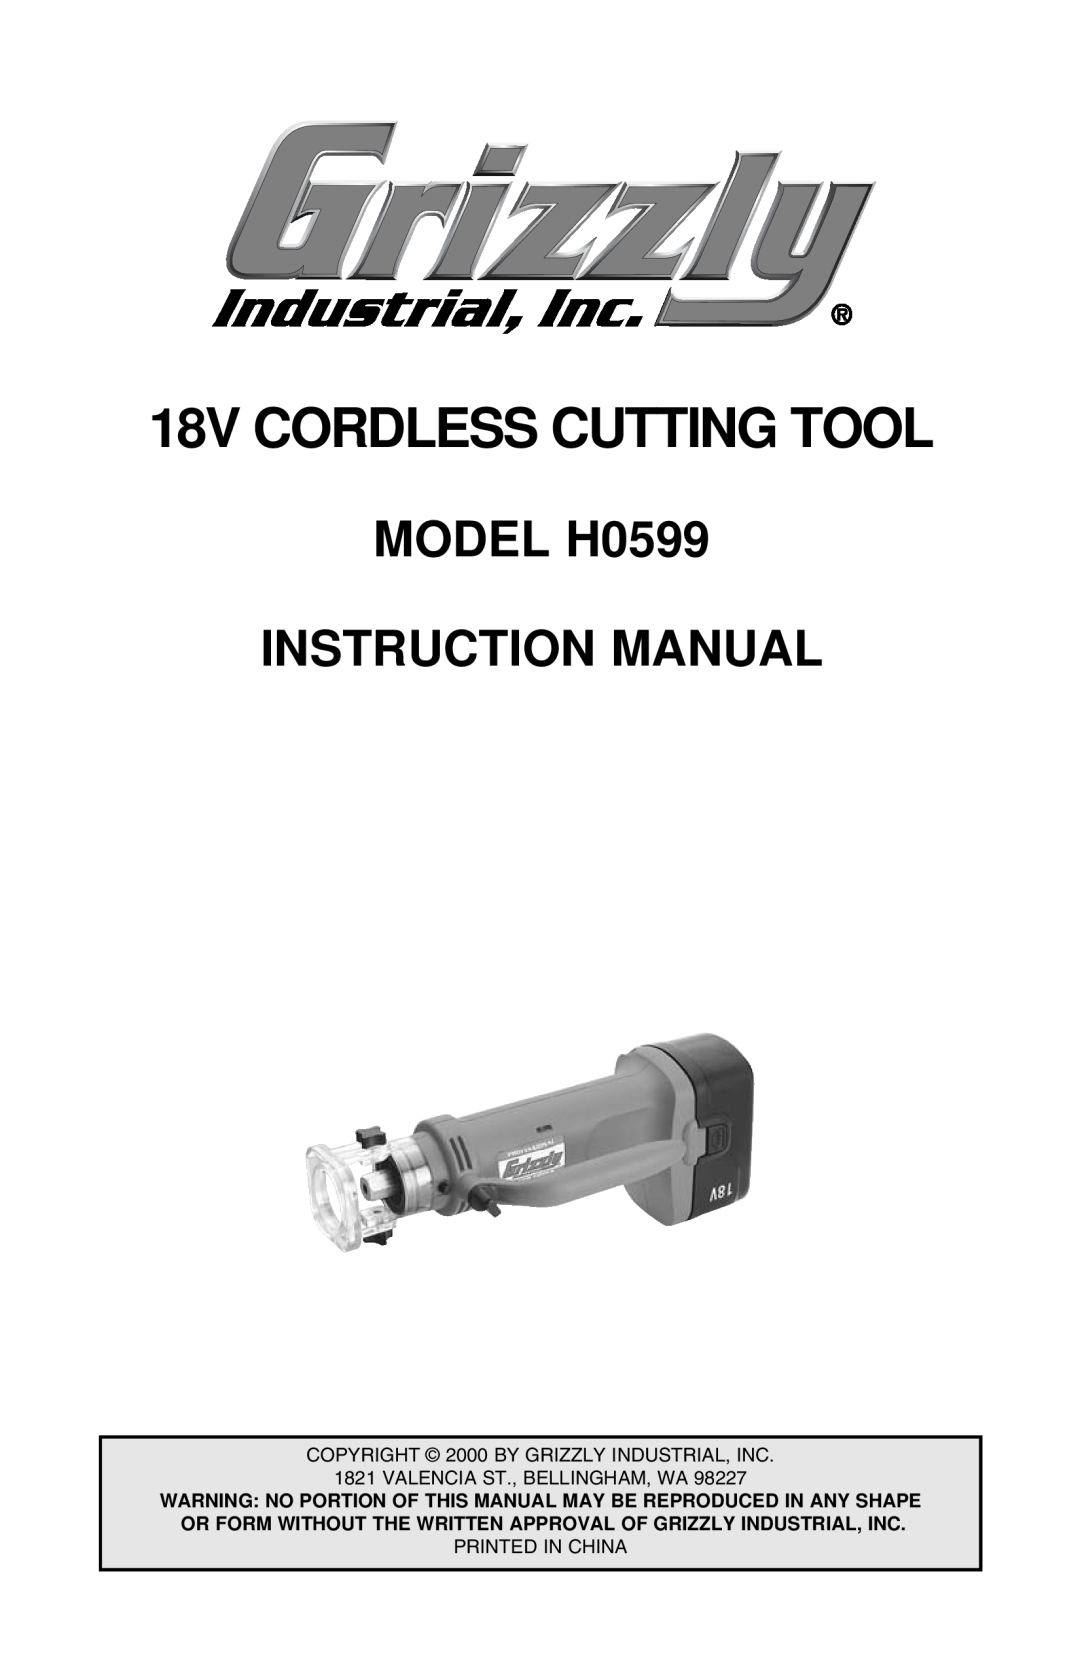 Grizzly H0599 instruction manual 18V CORDLESS CUTTING TOOL 